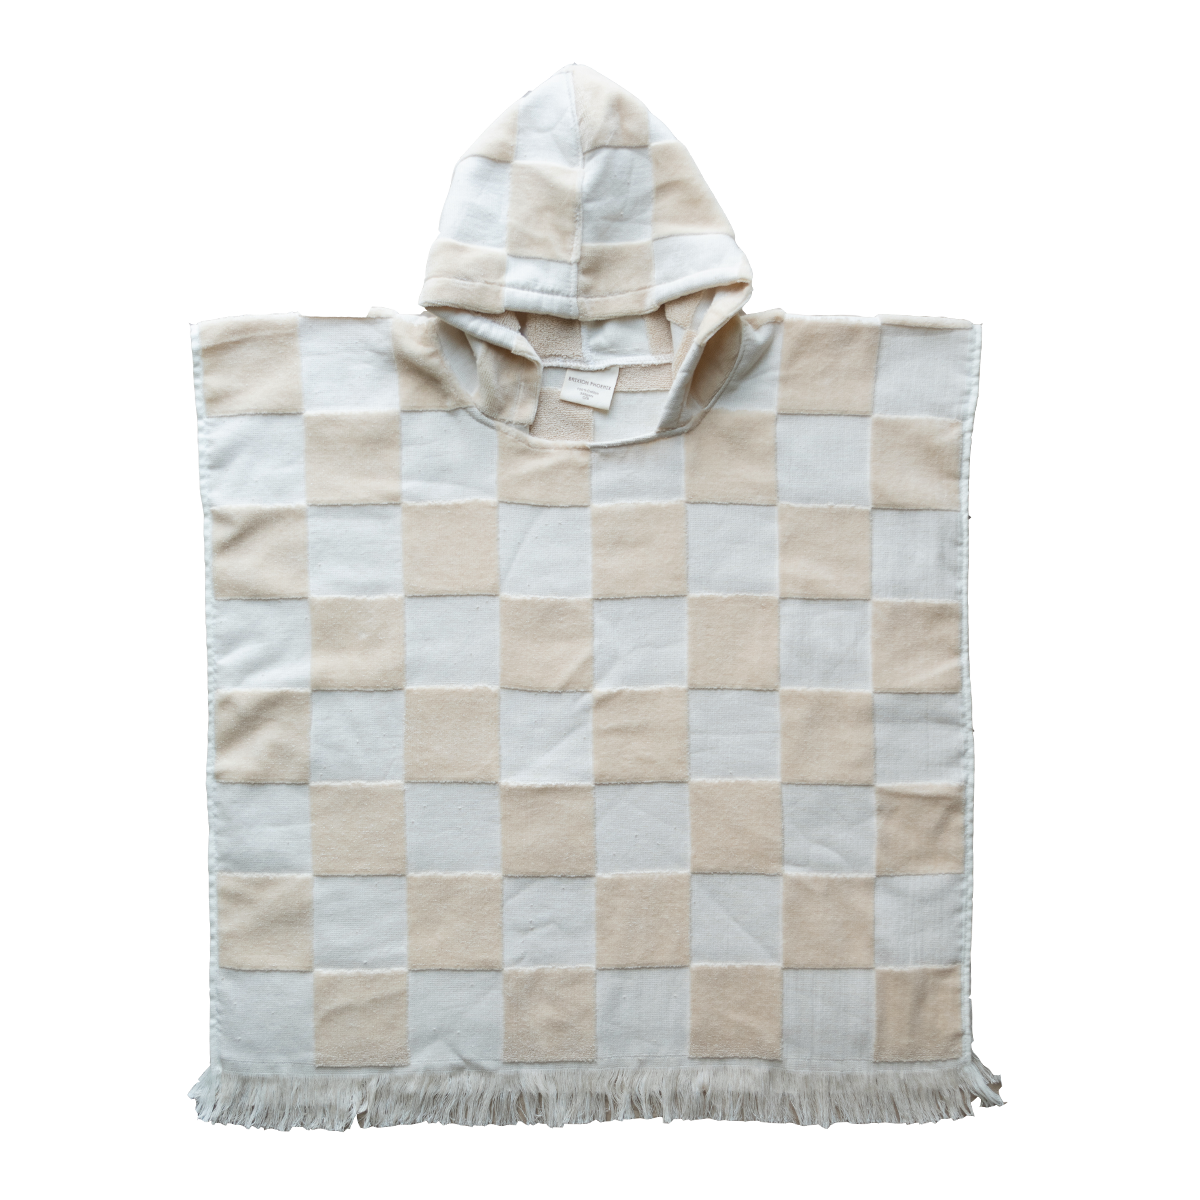 Hooded Poncho Towel Checkerboard